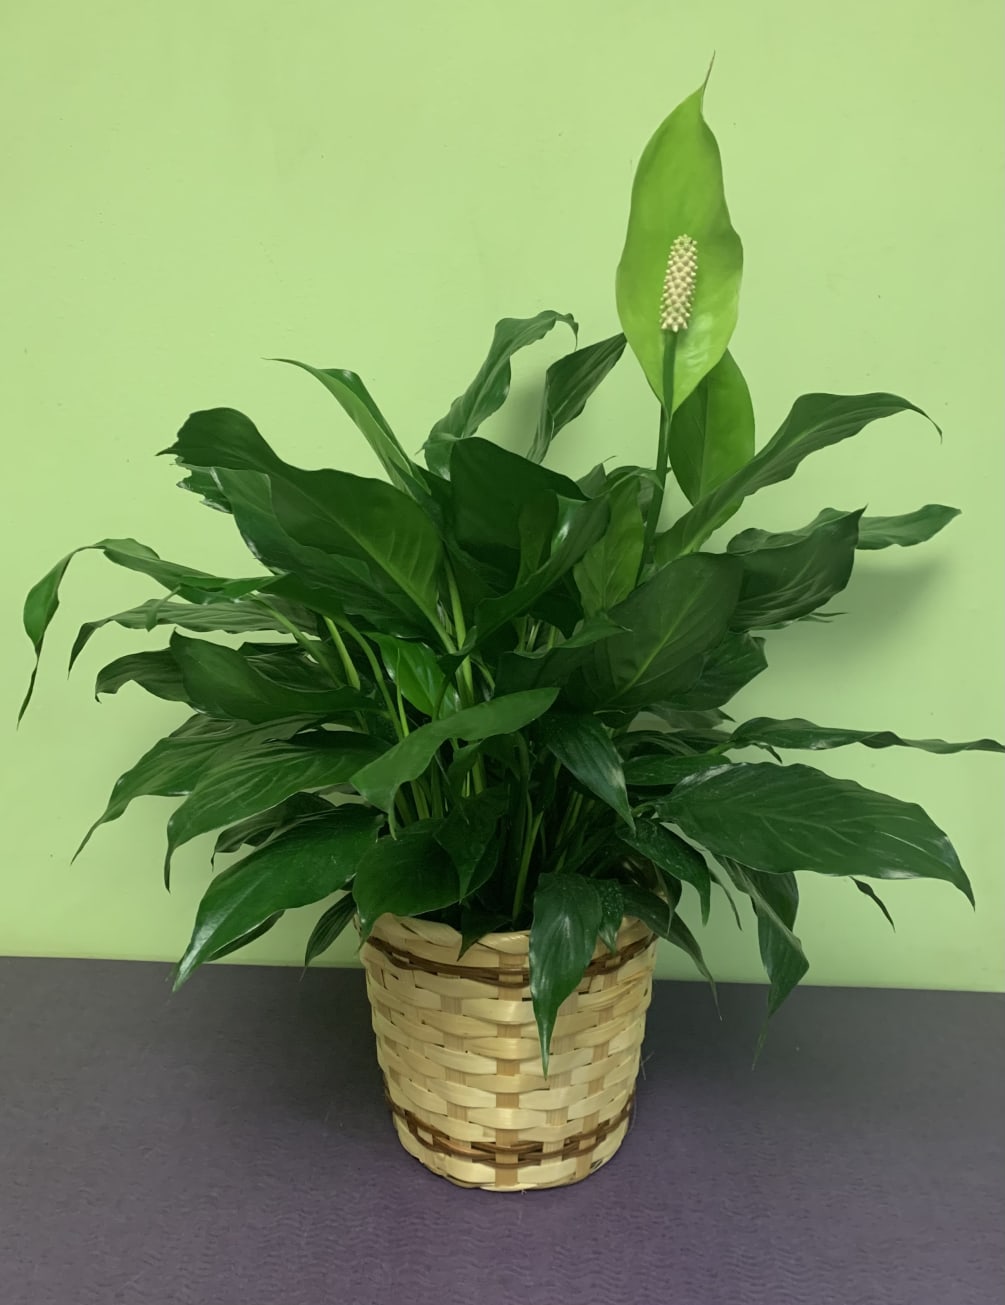 This plant is the ultimate house plant. They are one of the